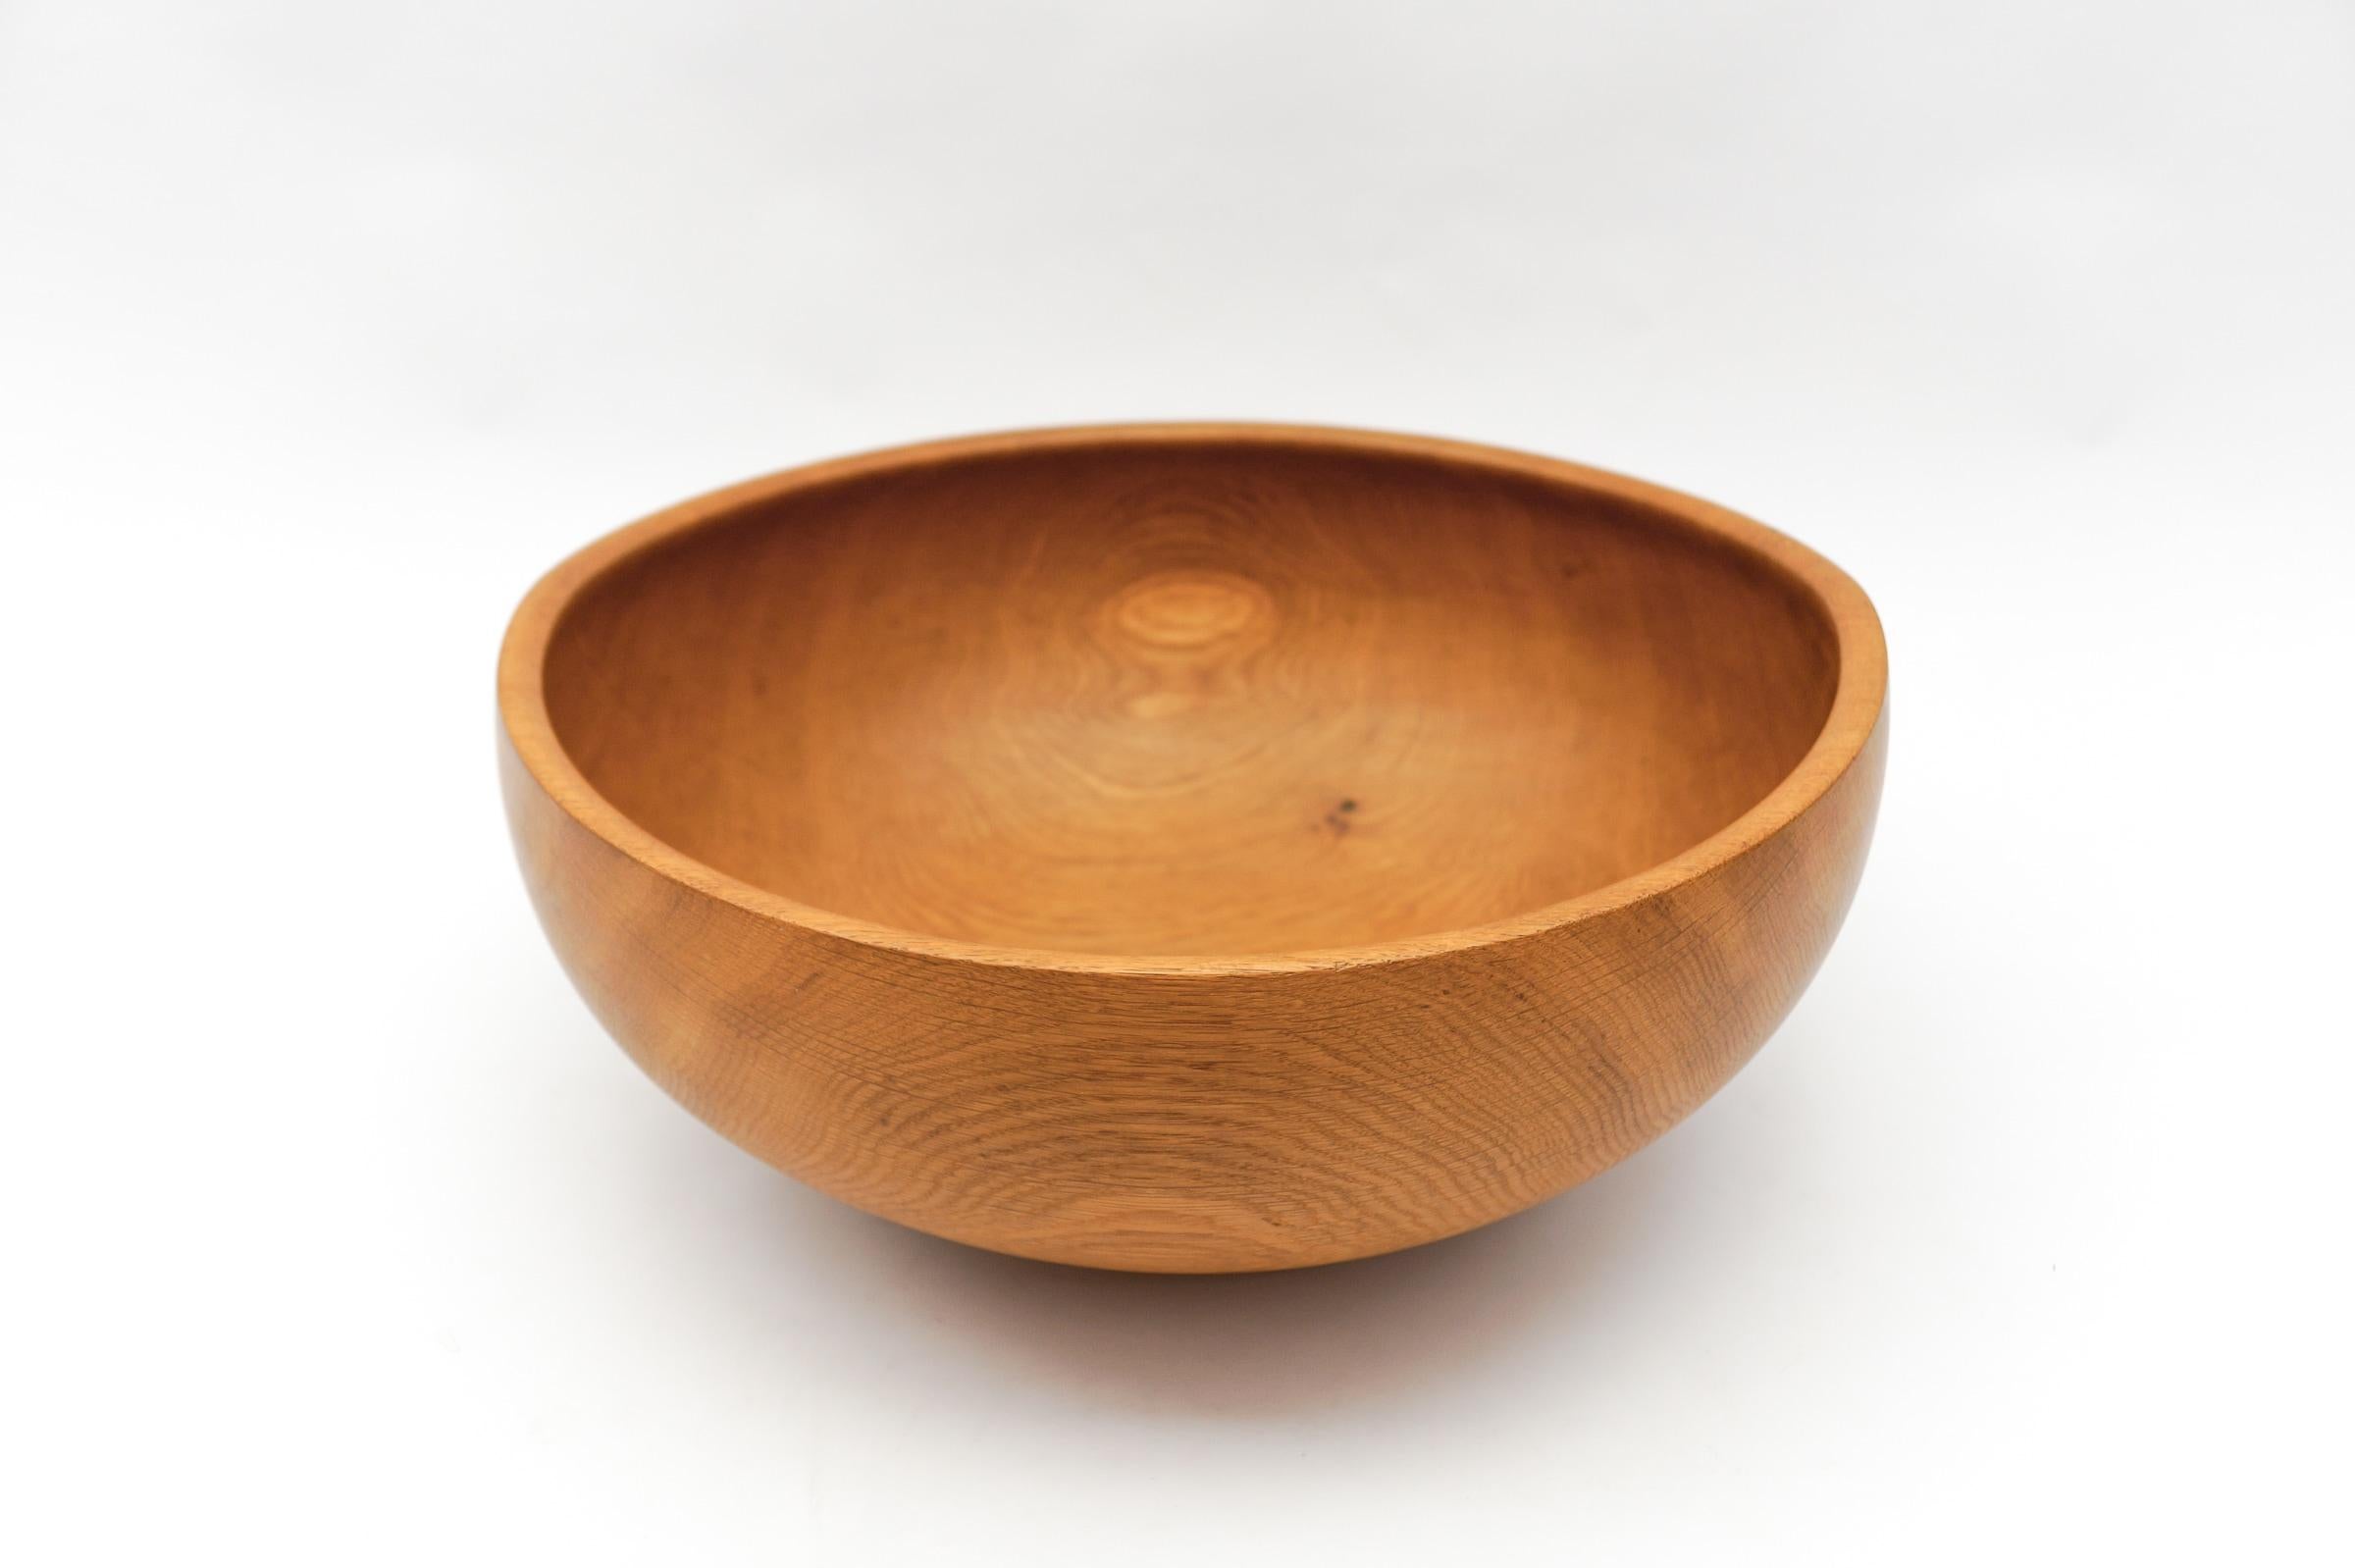 Awesome Huge Mid-Century Modern Oak Bowl by K. Weichselbaum, 1999 Germany In Excellent Condition For Sale In Nürnberg, Bayern